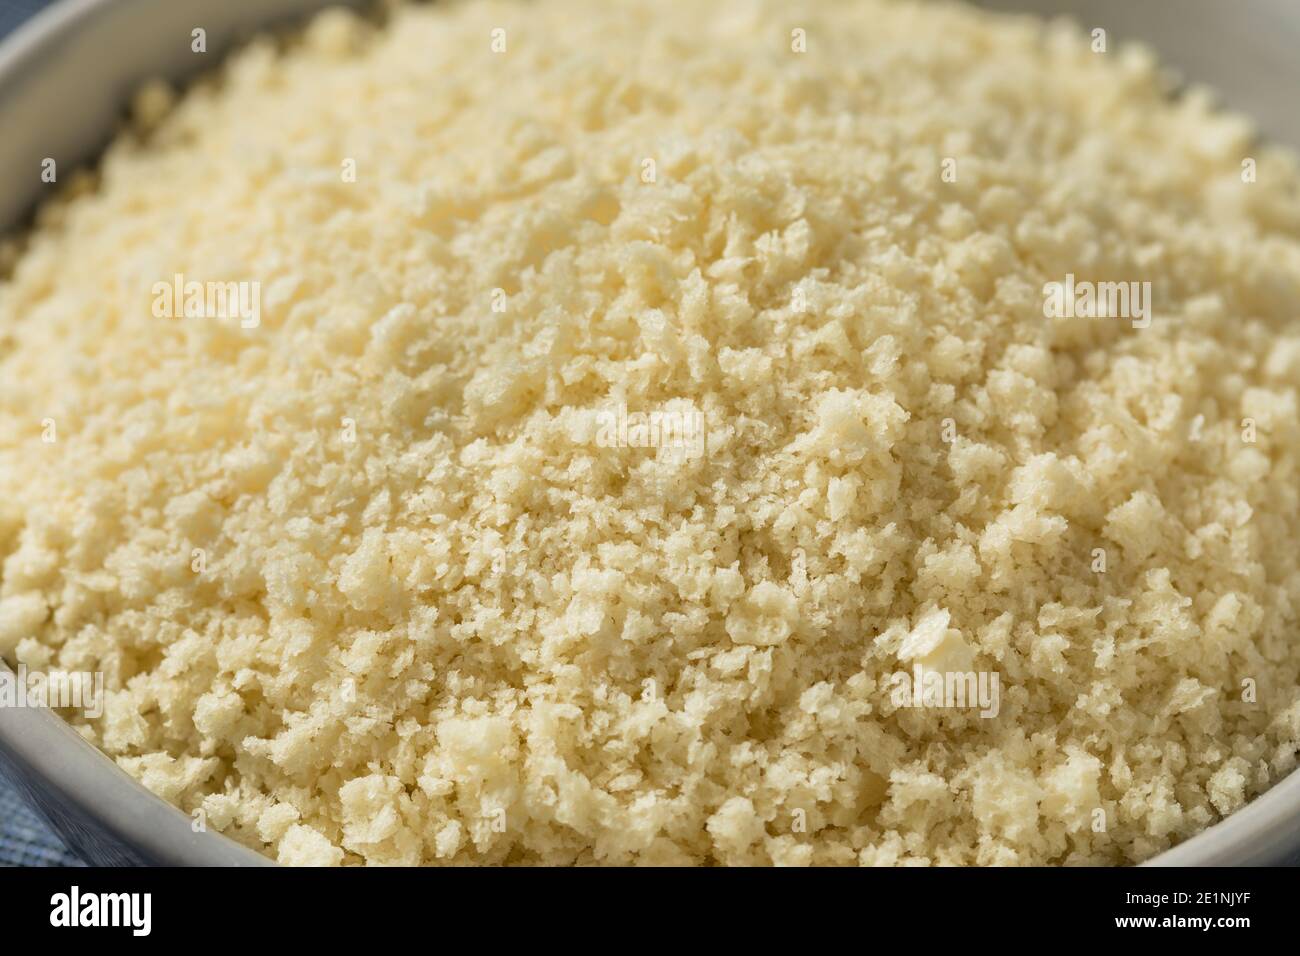 Homemade Panko Bread Crumbs in a Bowl Stock Photo - Alamy